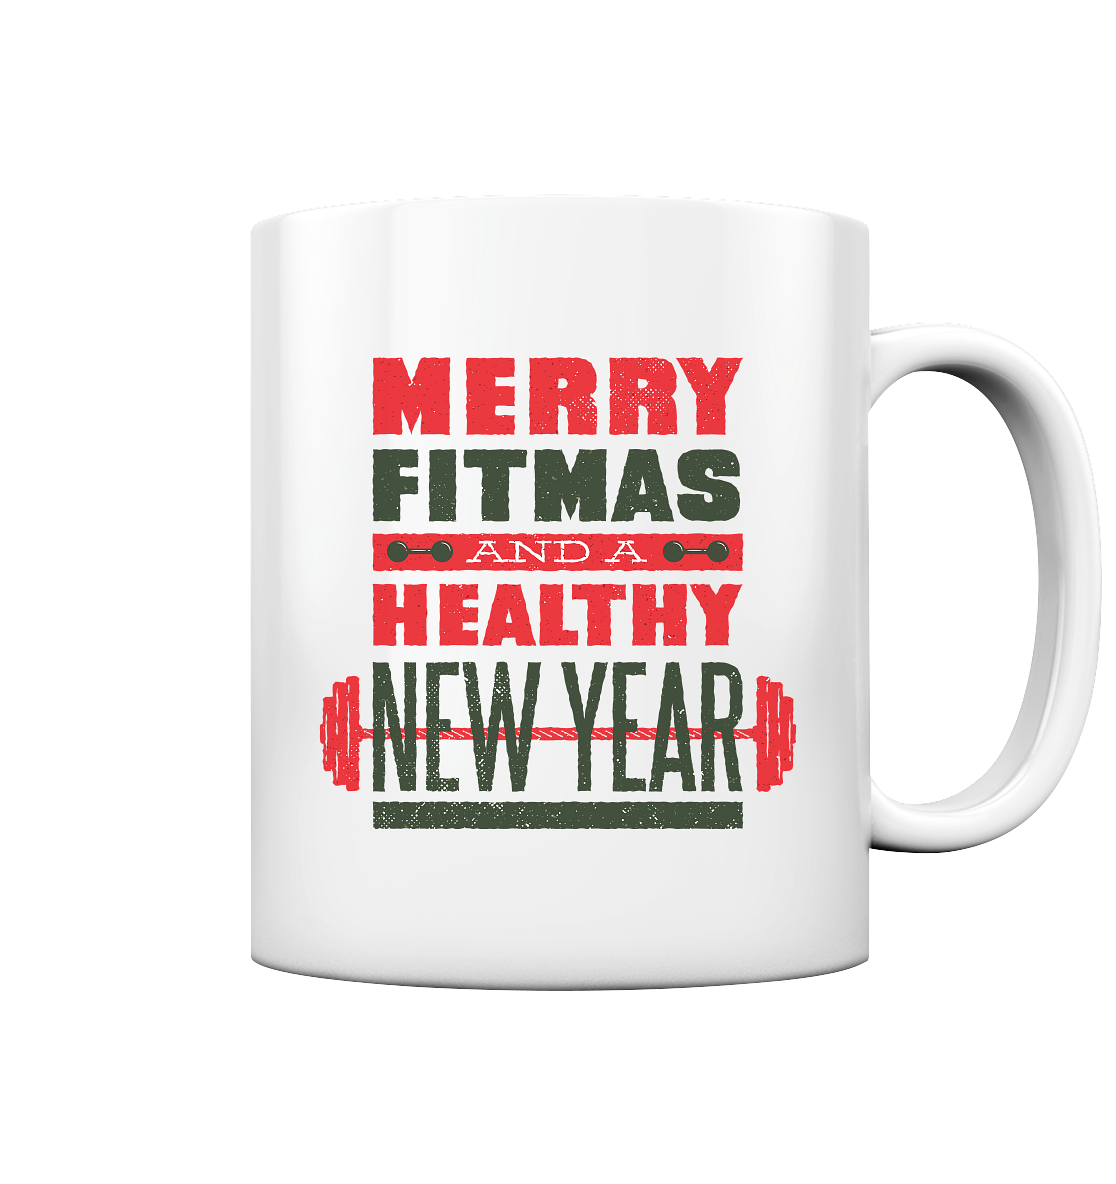 Weihnachtliches Design, Gym, Merry Fitmas and a Healthy New Year - Tasse glossy